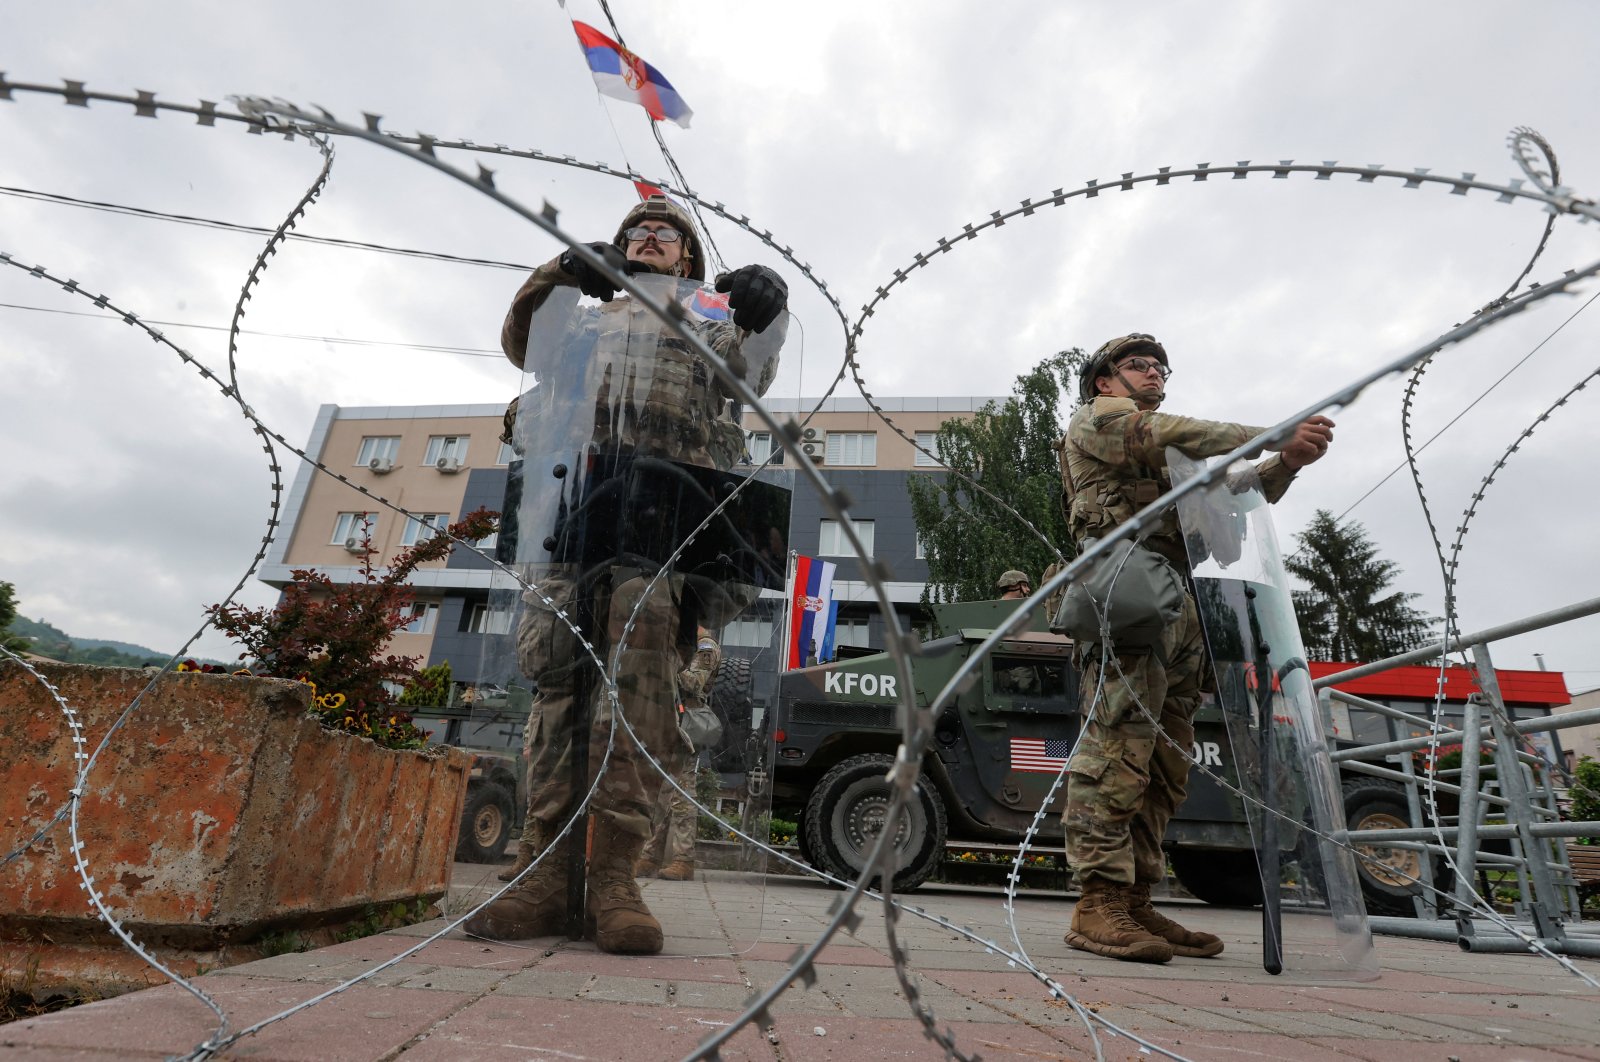 U.S. KFOR soldiers stand guard in front of the municipality office, Leposavic, Kosovo, May 29, 2023. (Reuters Photo)